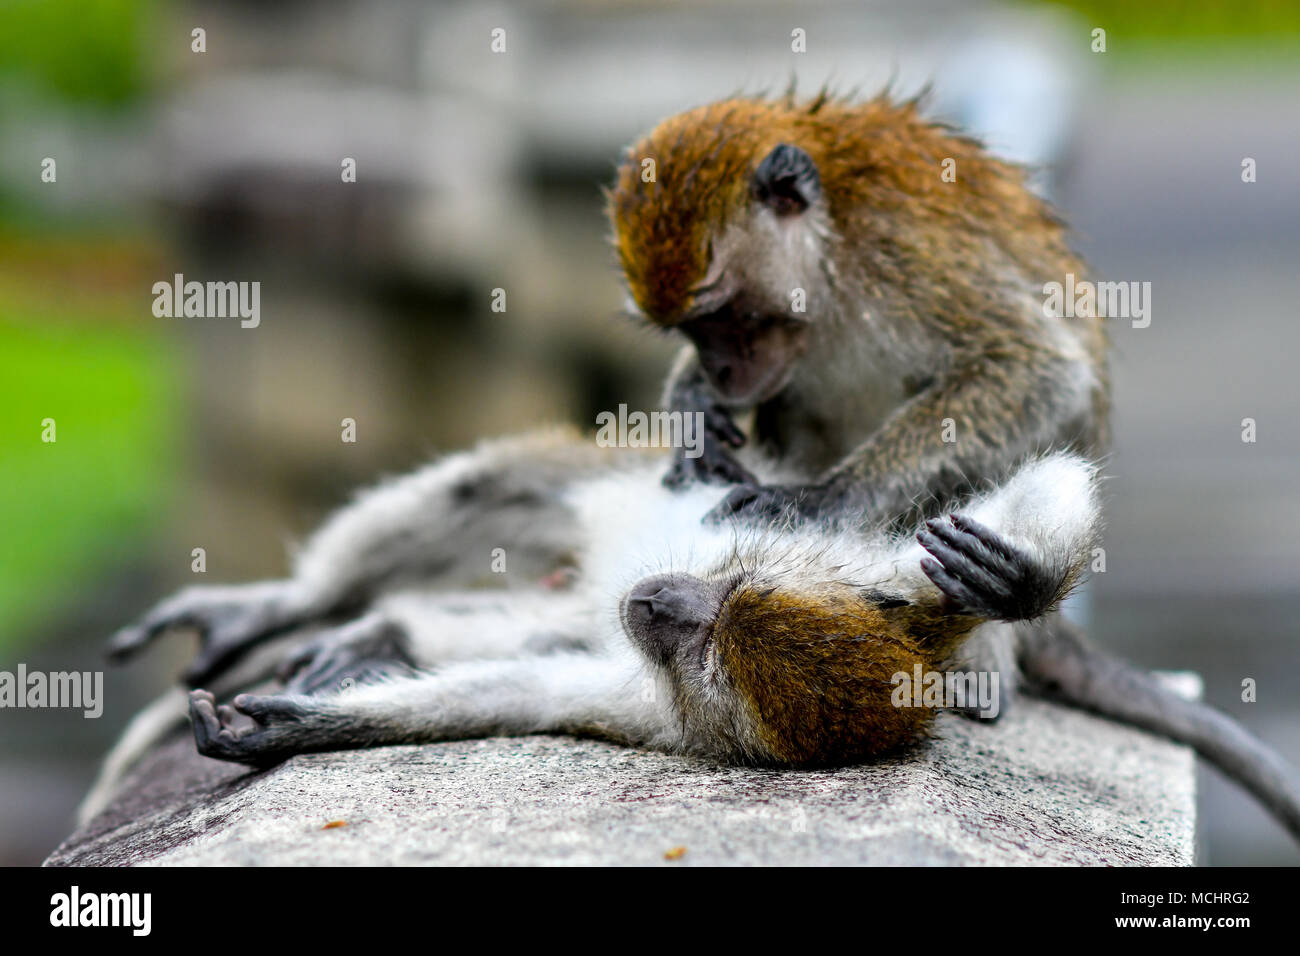 Long-tailed Macaque in der Wildnis Stockfoto